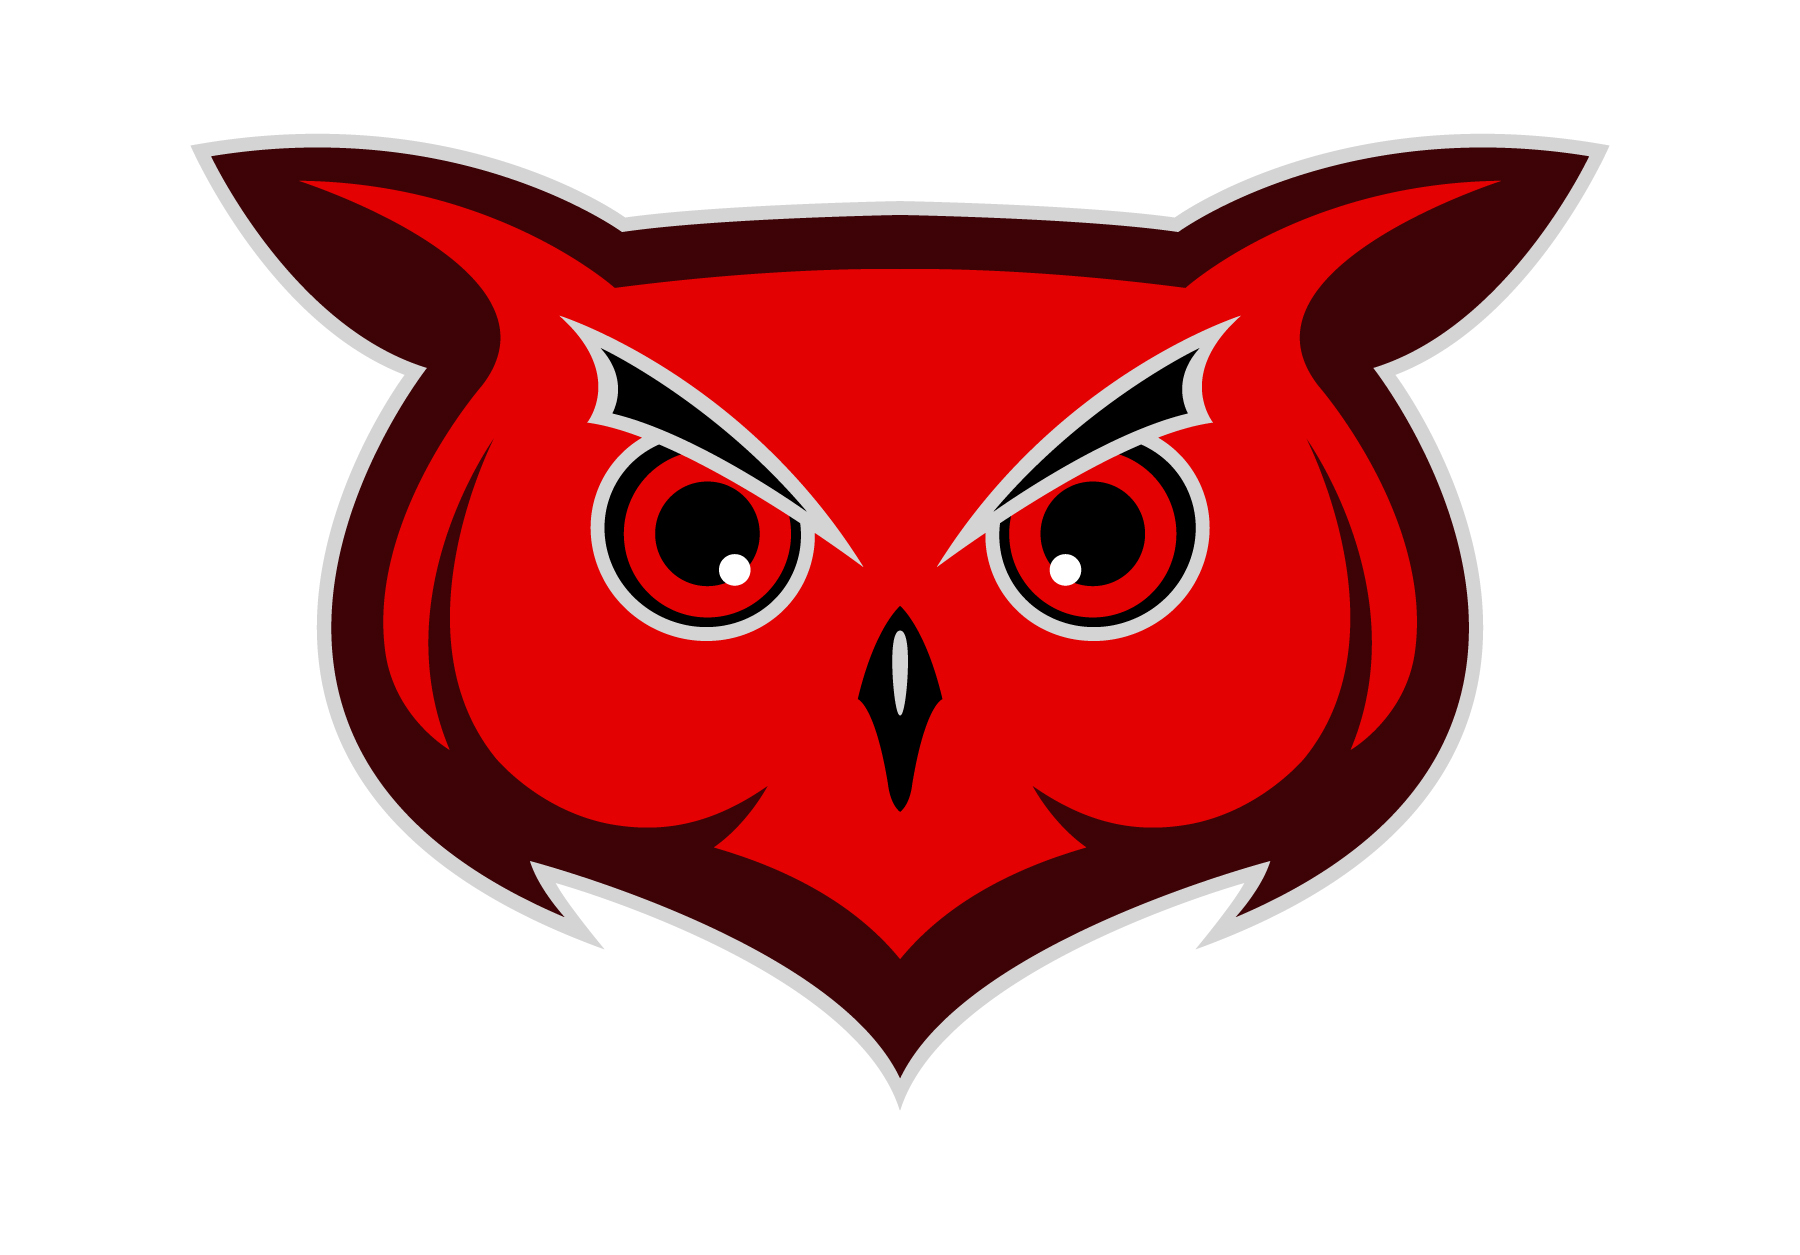 The Lookouts logo is based on the Great Horned Owl Lewis mentioned in his journals